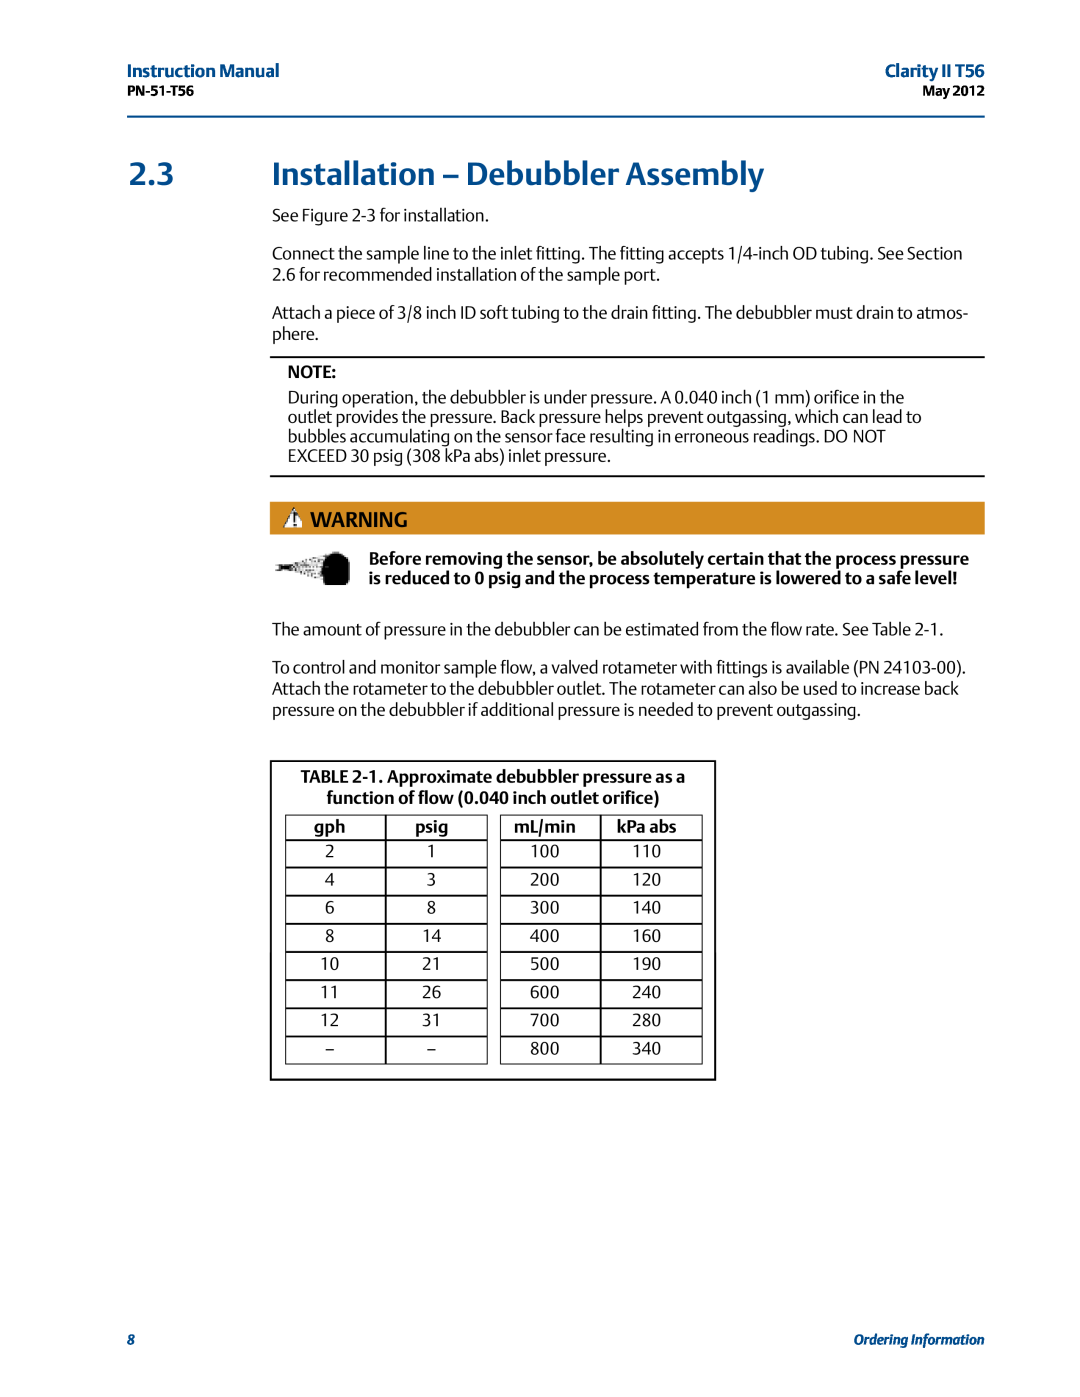 Emerson PN-51-T56 instruction manual Installation - Debubbler Assembly, 1. Approximate debubbler pressure as a, psig 